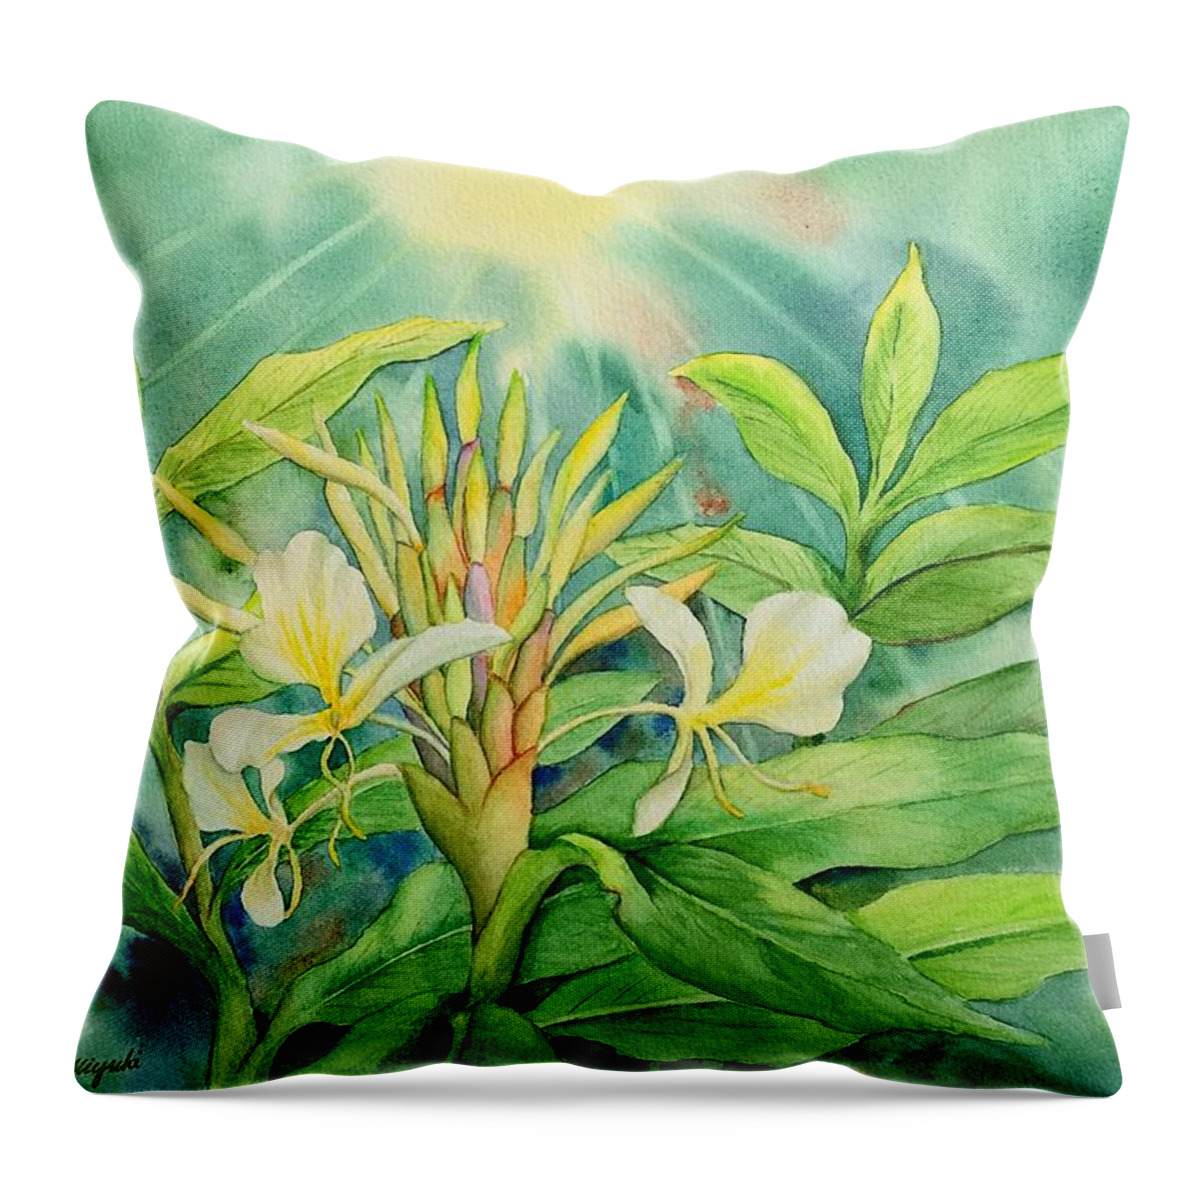 Flower Throw Pillow featuring the painting Morning Ginger by Kelly Miyuki Kimura